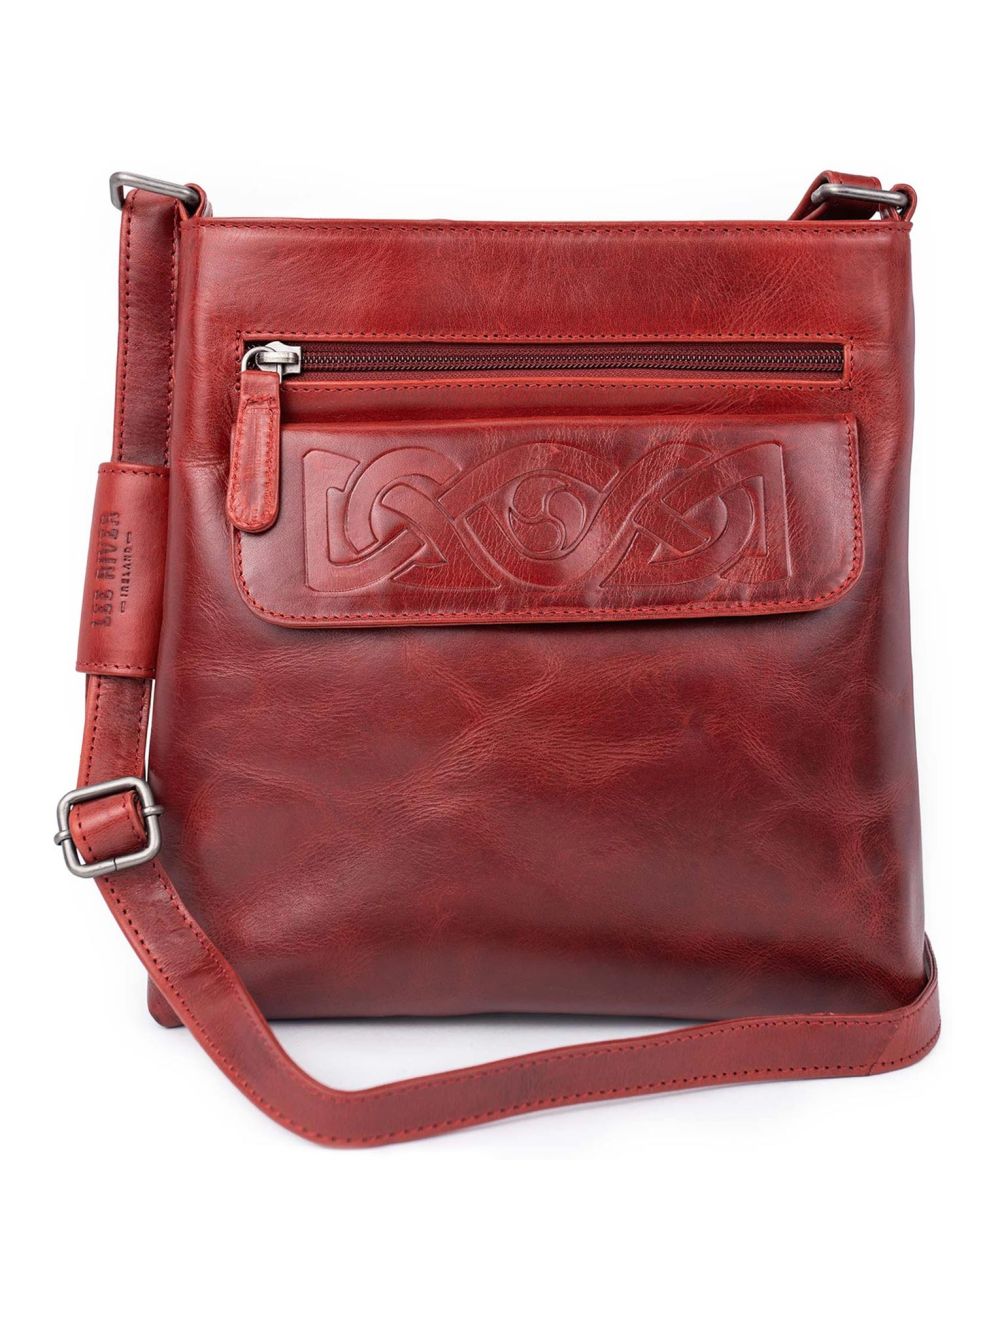 Buy TOYOOSKY Leather Small Cross Body Purse Crossbody Bag Black Red Evening  Party Wedding Clutches Shoulder Bag at Amazon.in